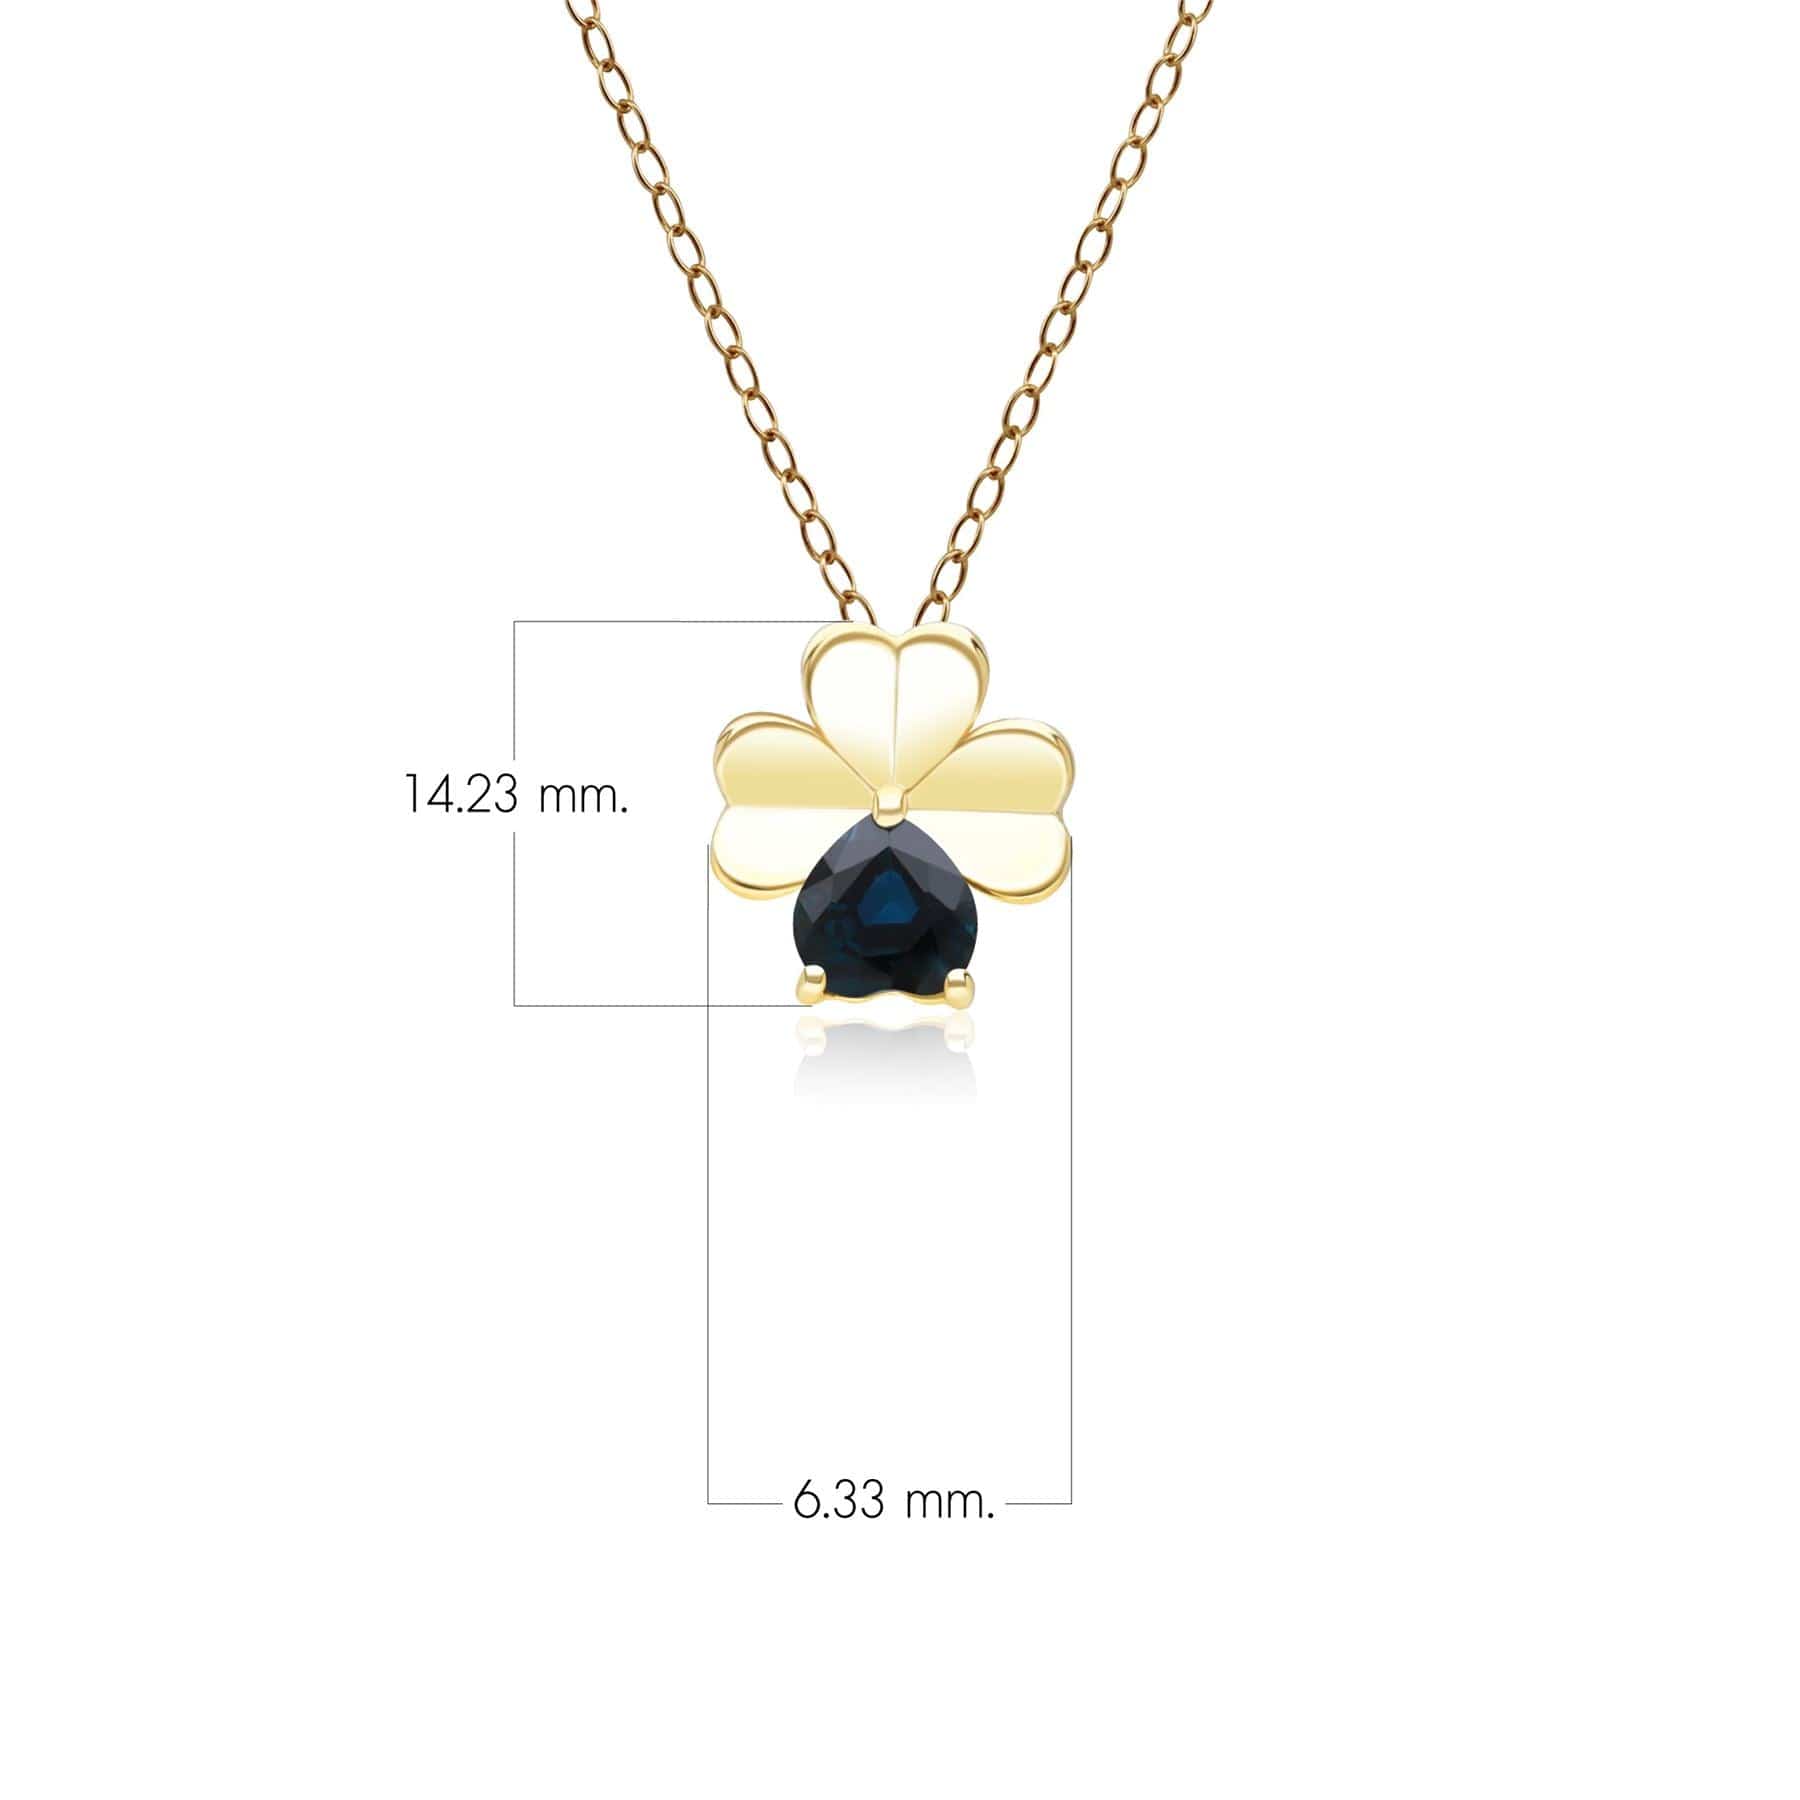 135P2126039 Gardenia Sapphire Clover Pendant Necklace in 9ct Yellow Gold Dimensions